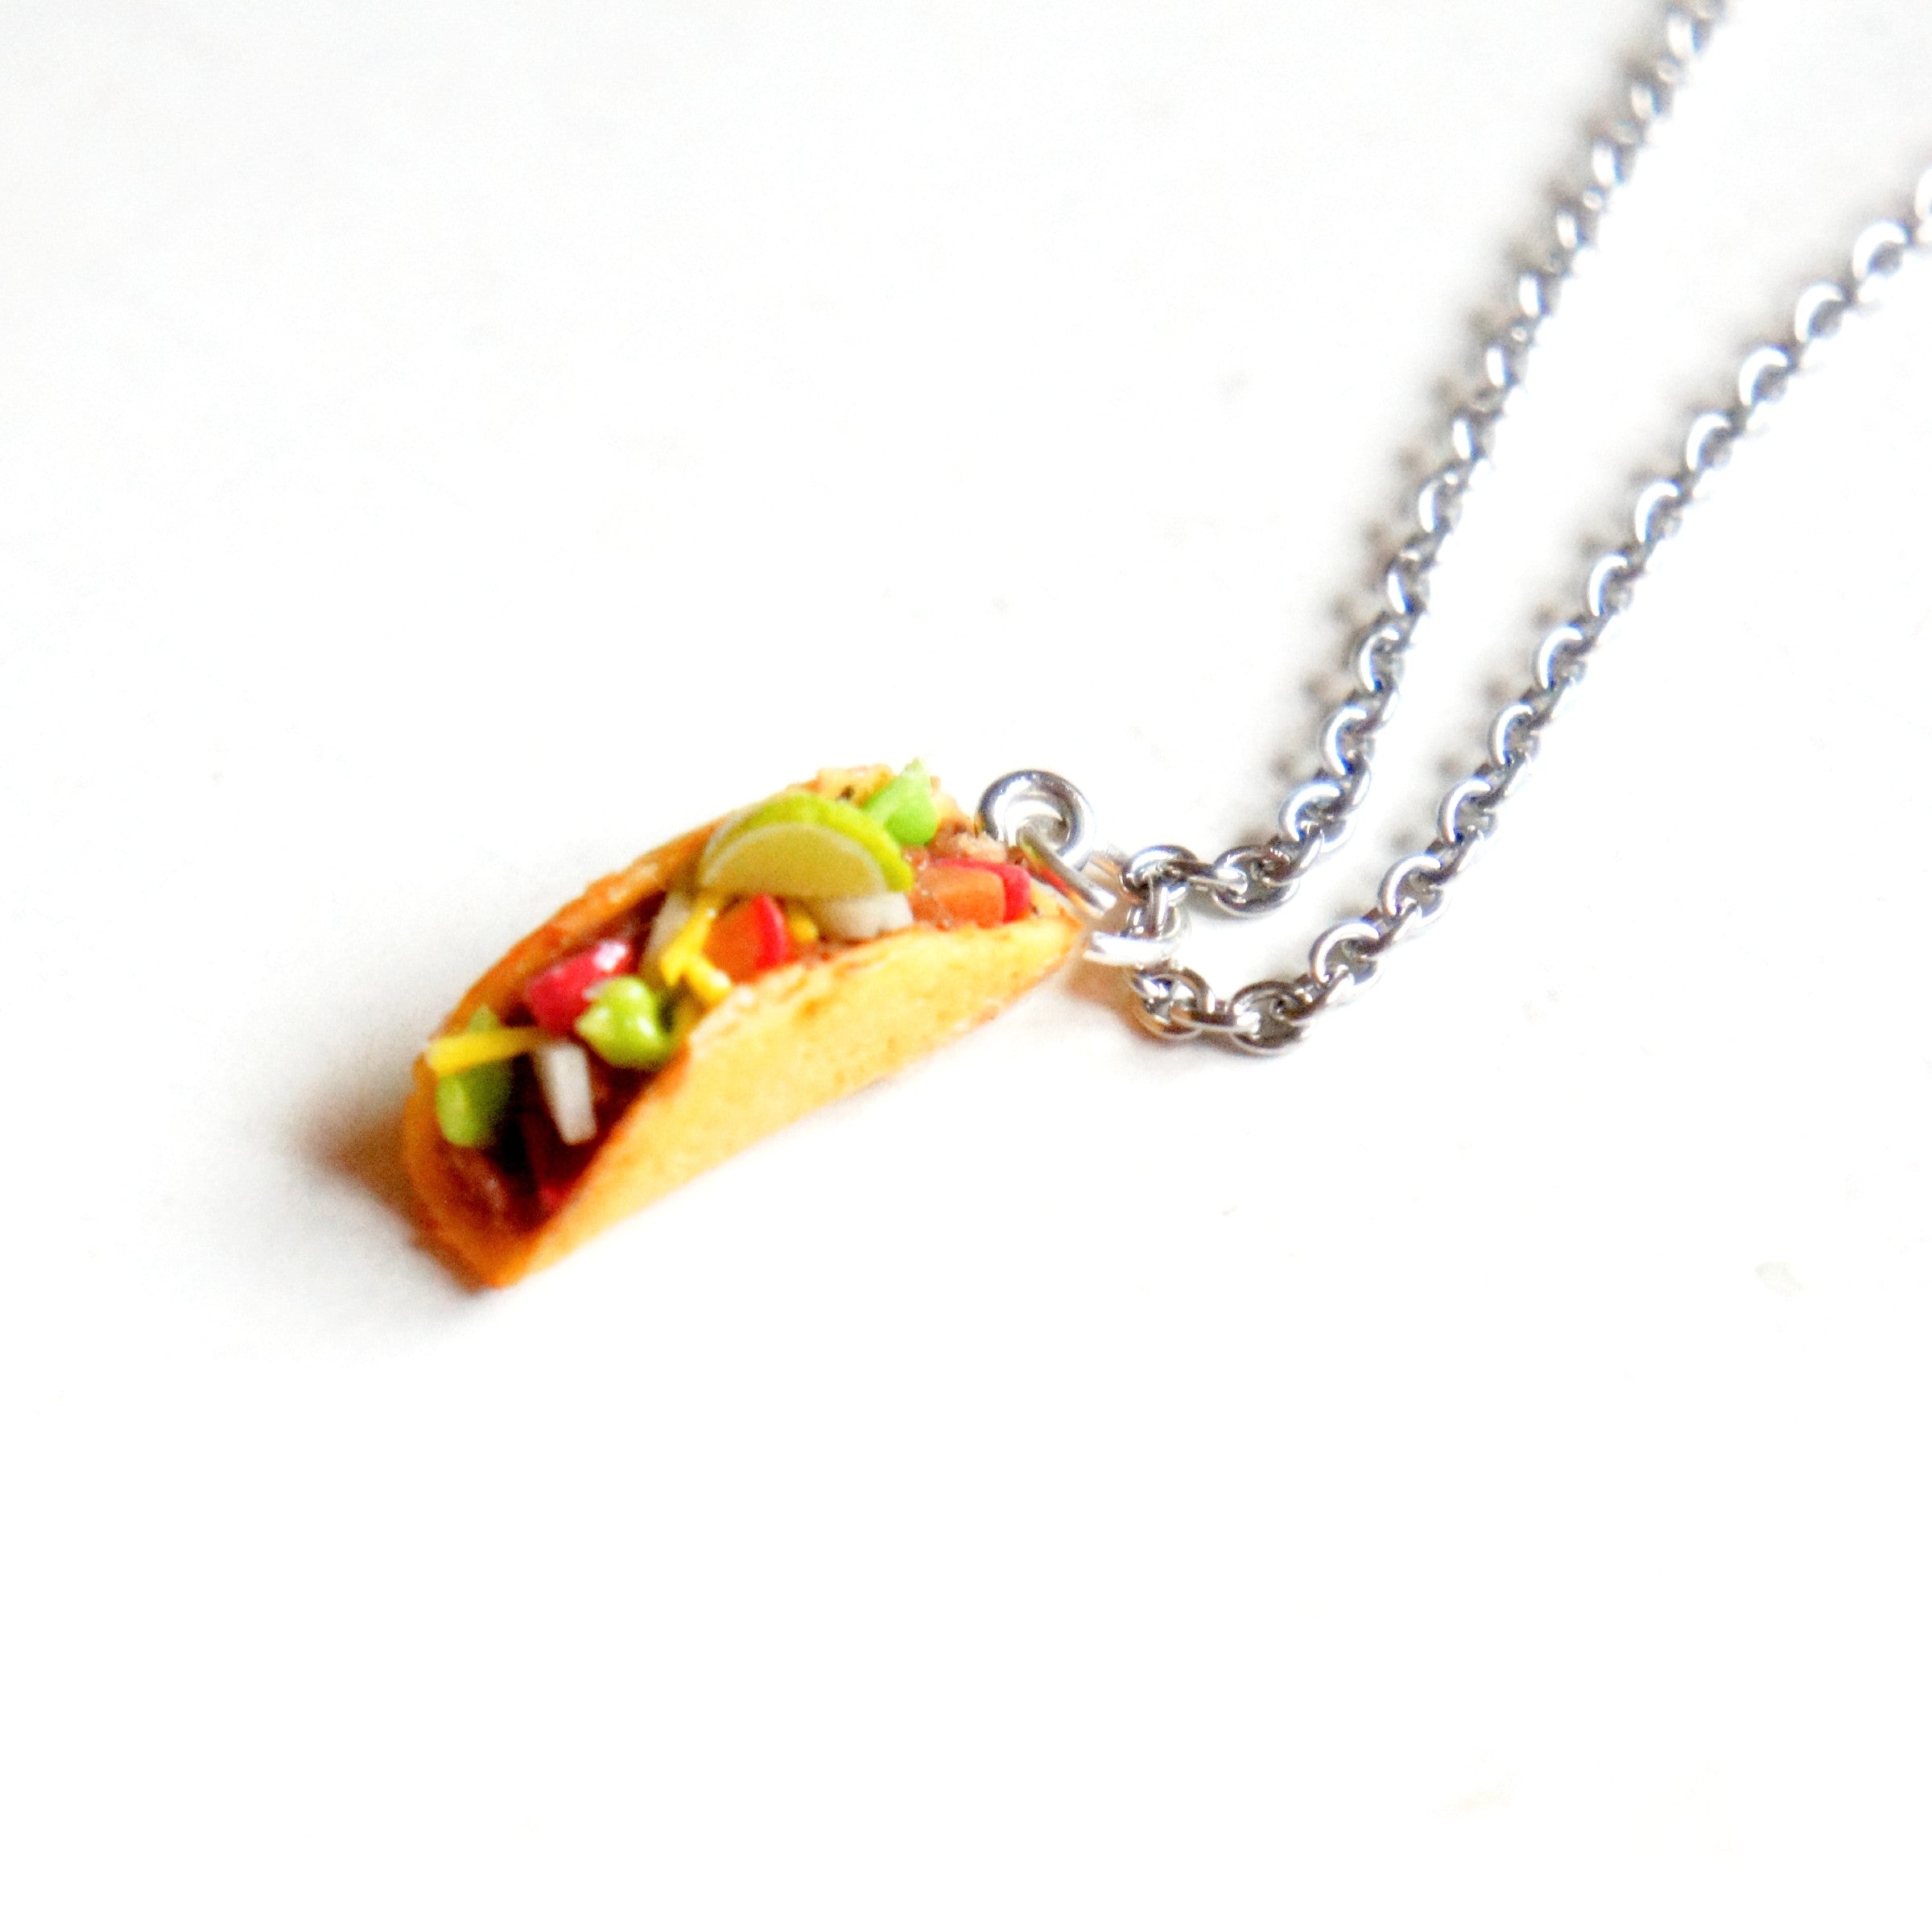 Taco Necklace - Jillicious charms and accessories